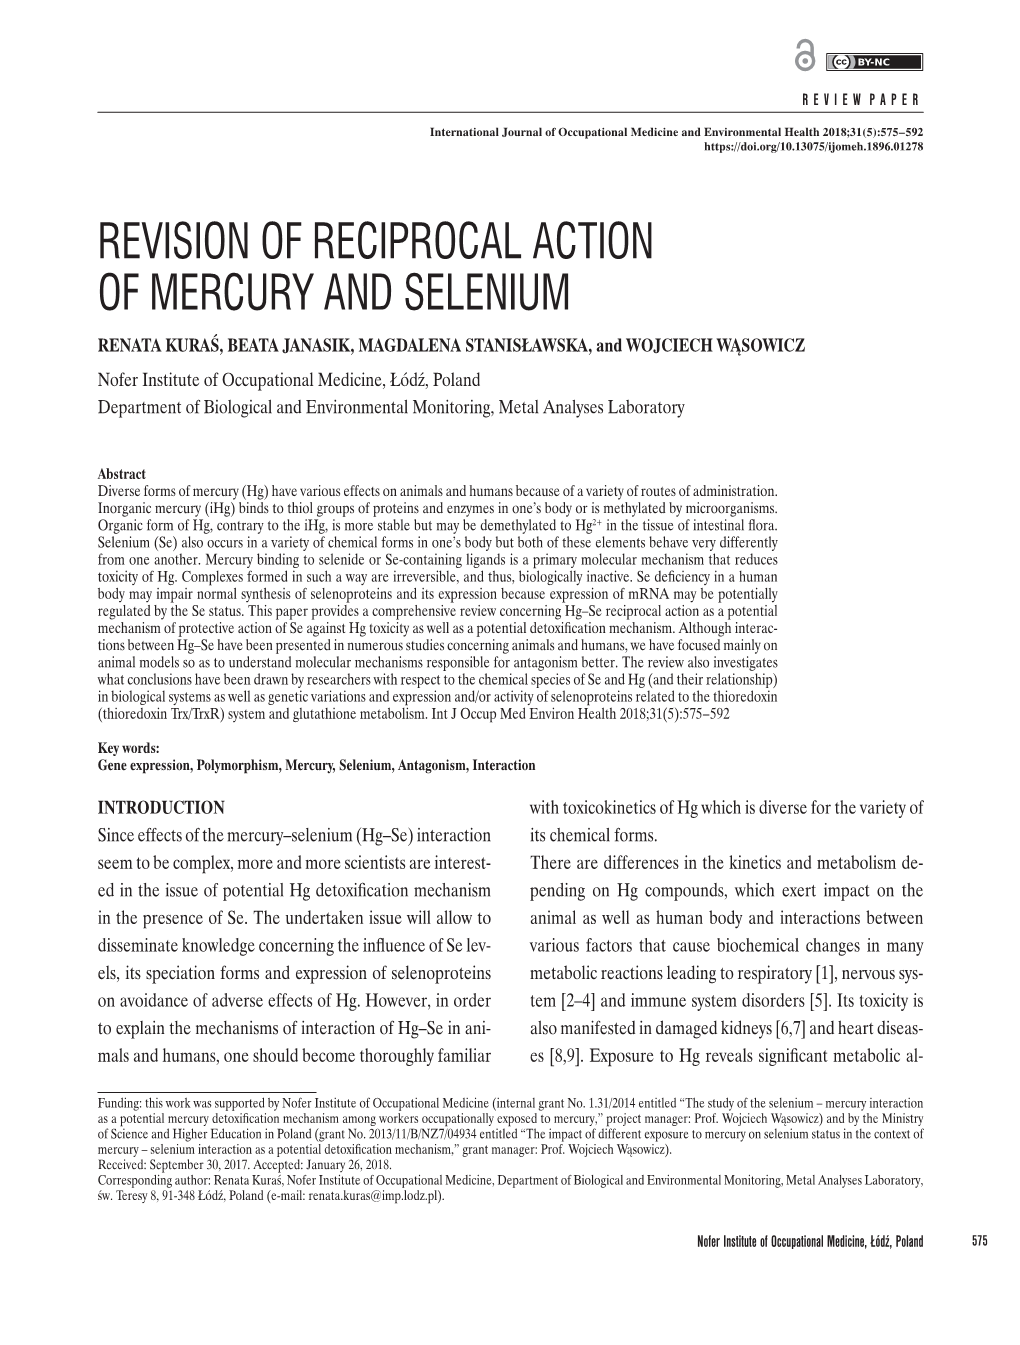 Revision of Reciprocal Action of Mercury and Selenium